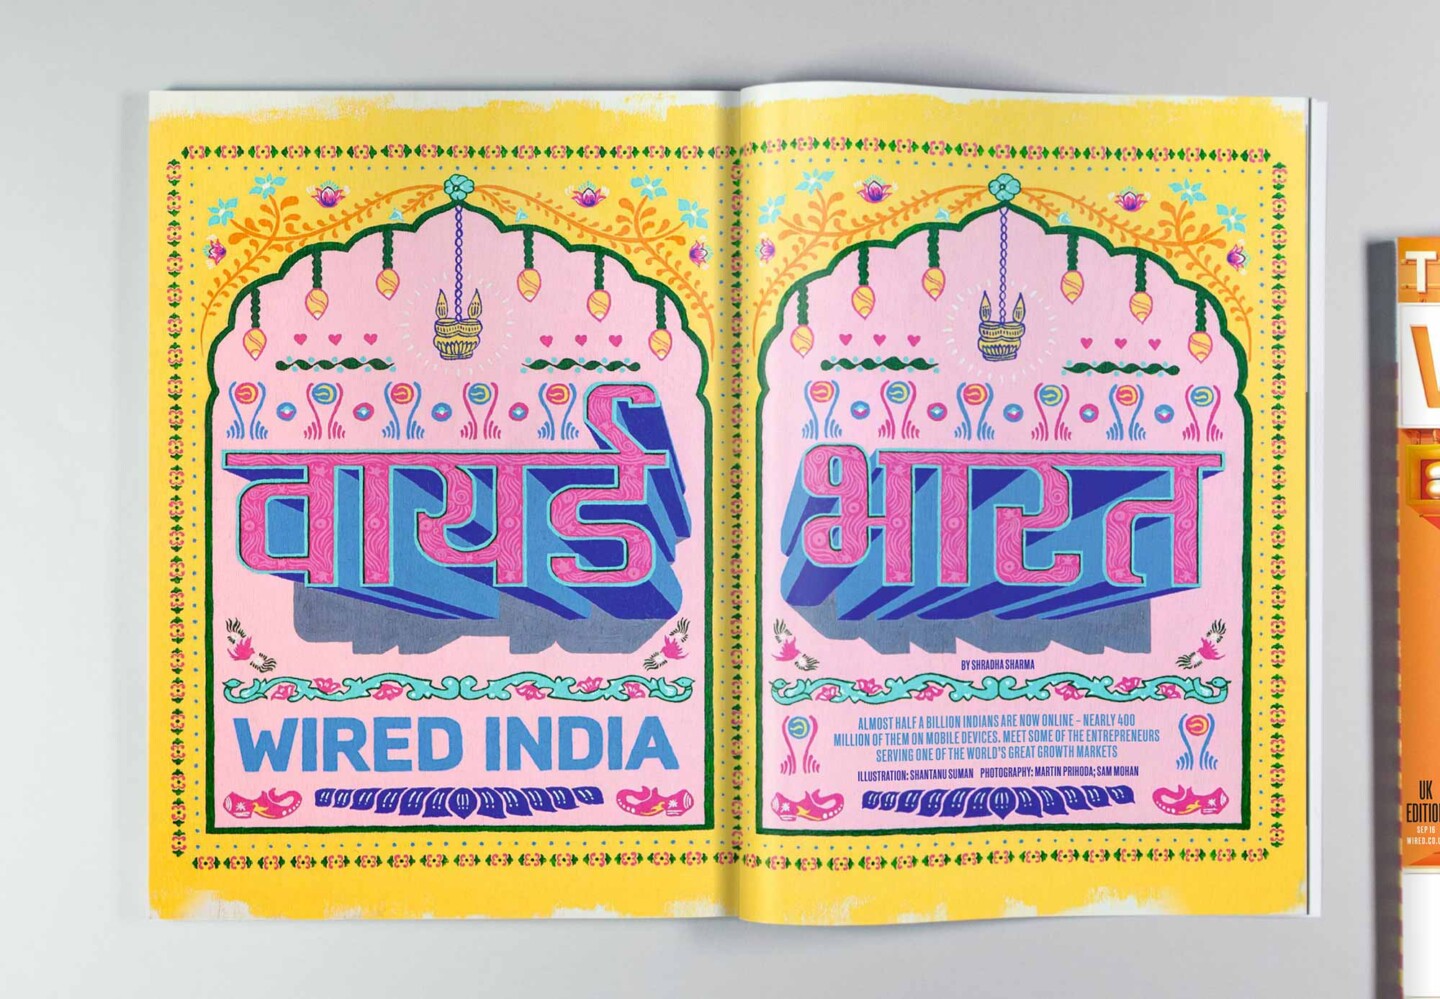 Wired India